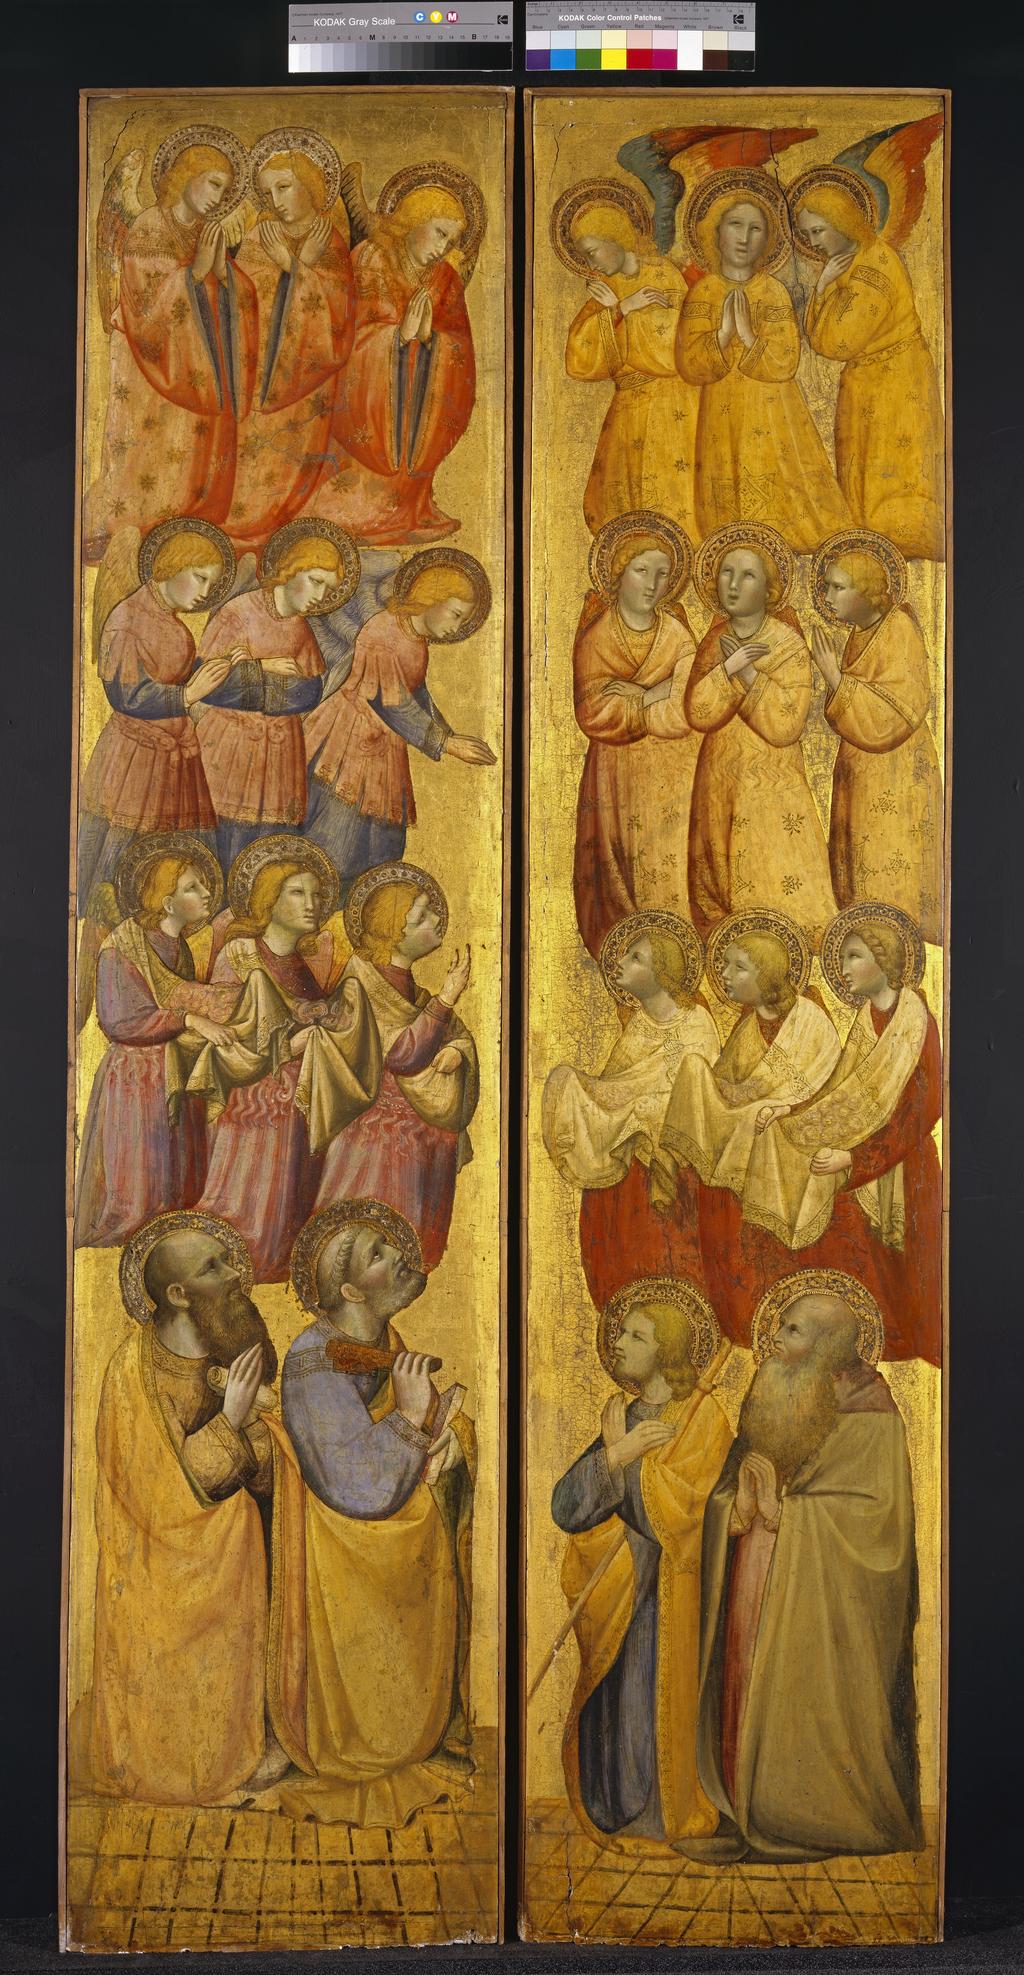 An image of Olivuccio di Cicarello (c.1365-1439). Left hand panel/1061A: St Peter and St Paul with Angels, c.1400. Tempera with gold on panel. Right hand panel/1061B: St James and possibly St Andrew with Angels, c.1400. Tempera with gold on panel.